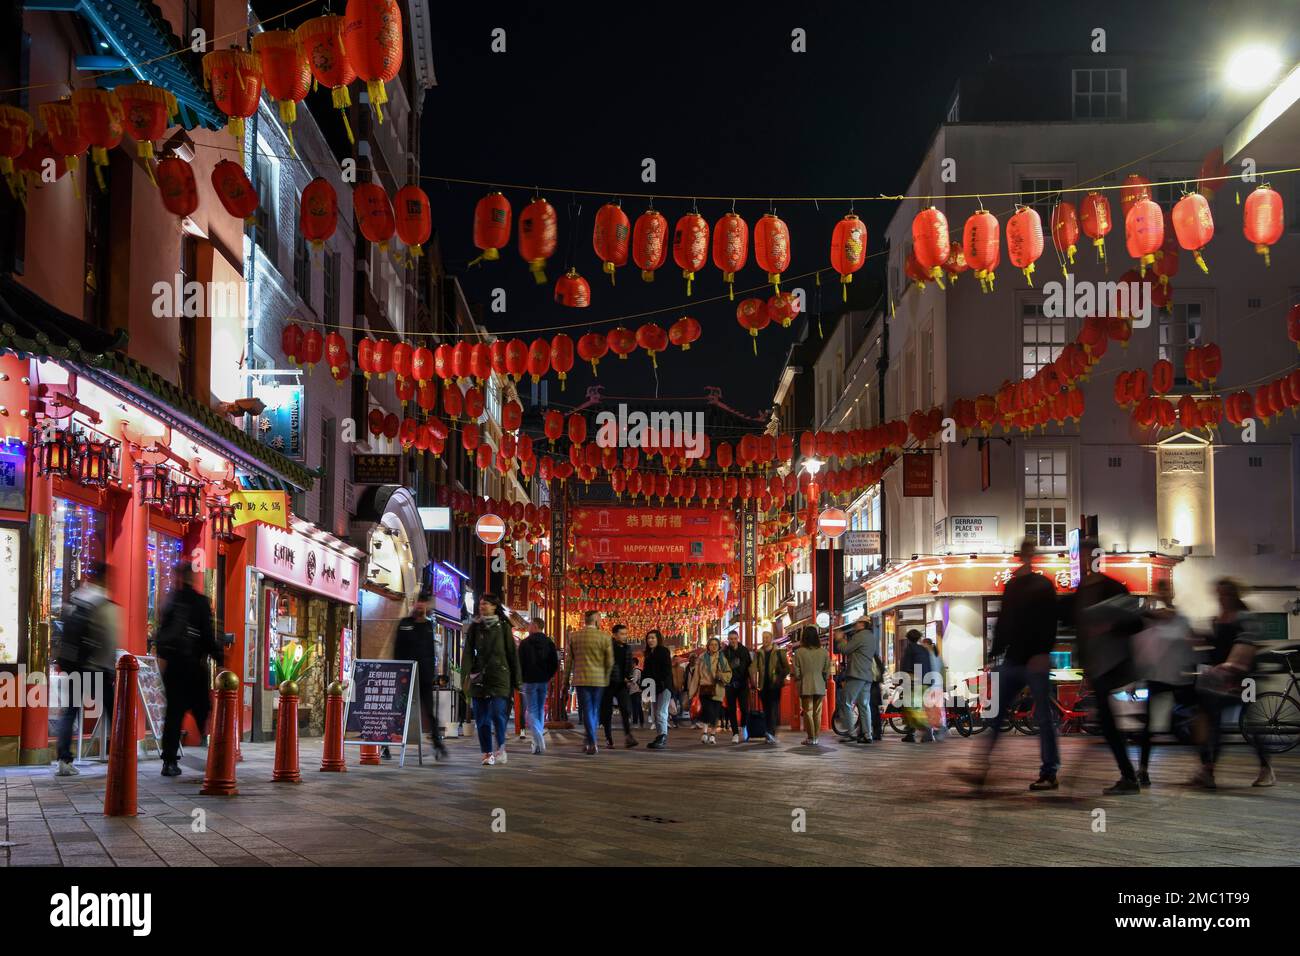 China Town by Night, quartier chinois, West End, Londres, Angleterre, Royaume-Uni Banque D'Images